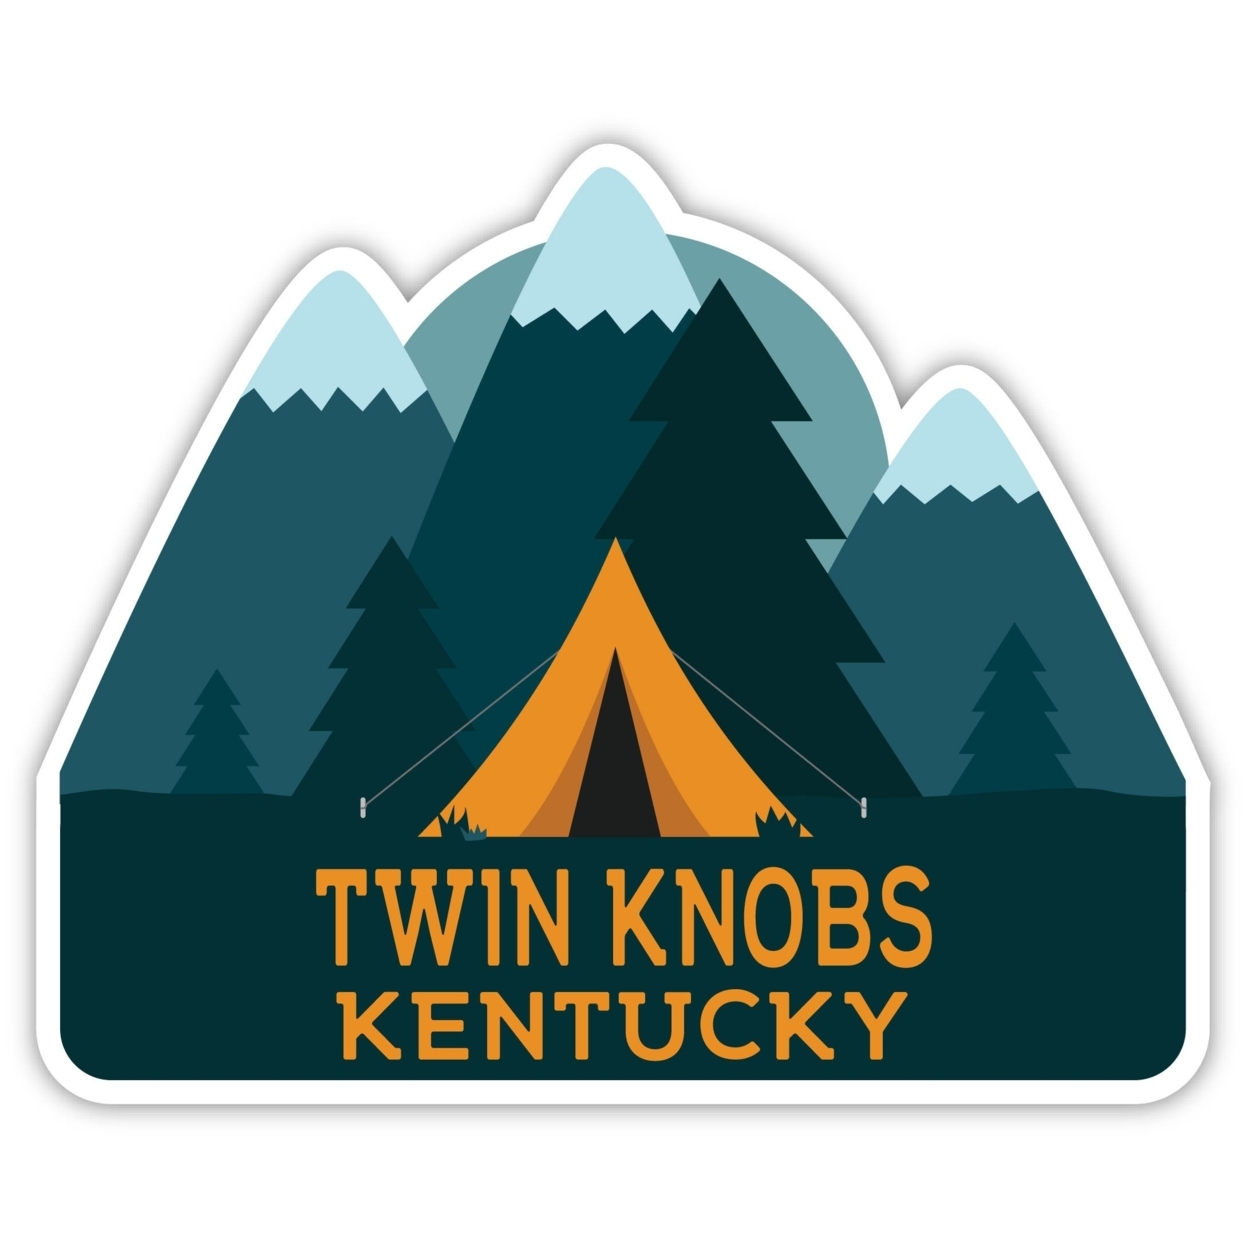 Twin Knobs Kentucky Souvenir Decorative Stickers (Choose Theme And Size) - Single Unit, 4-Inch, Tent